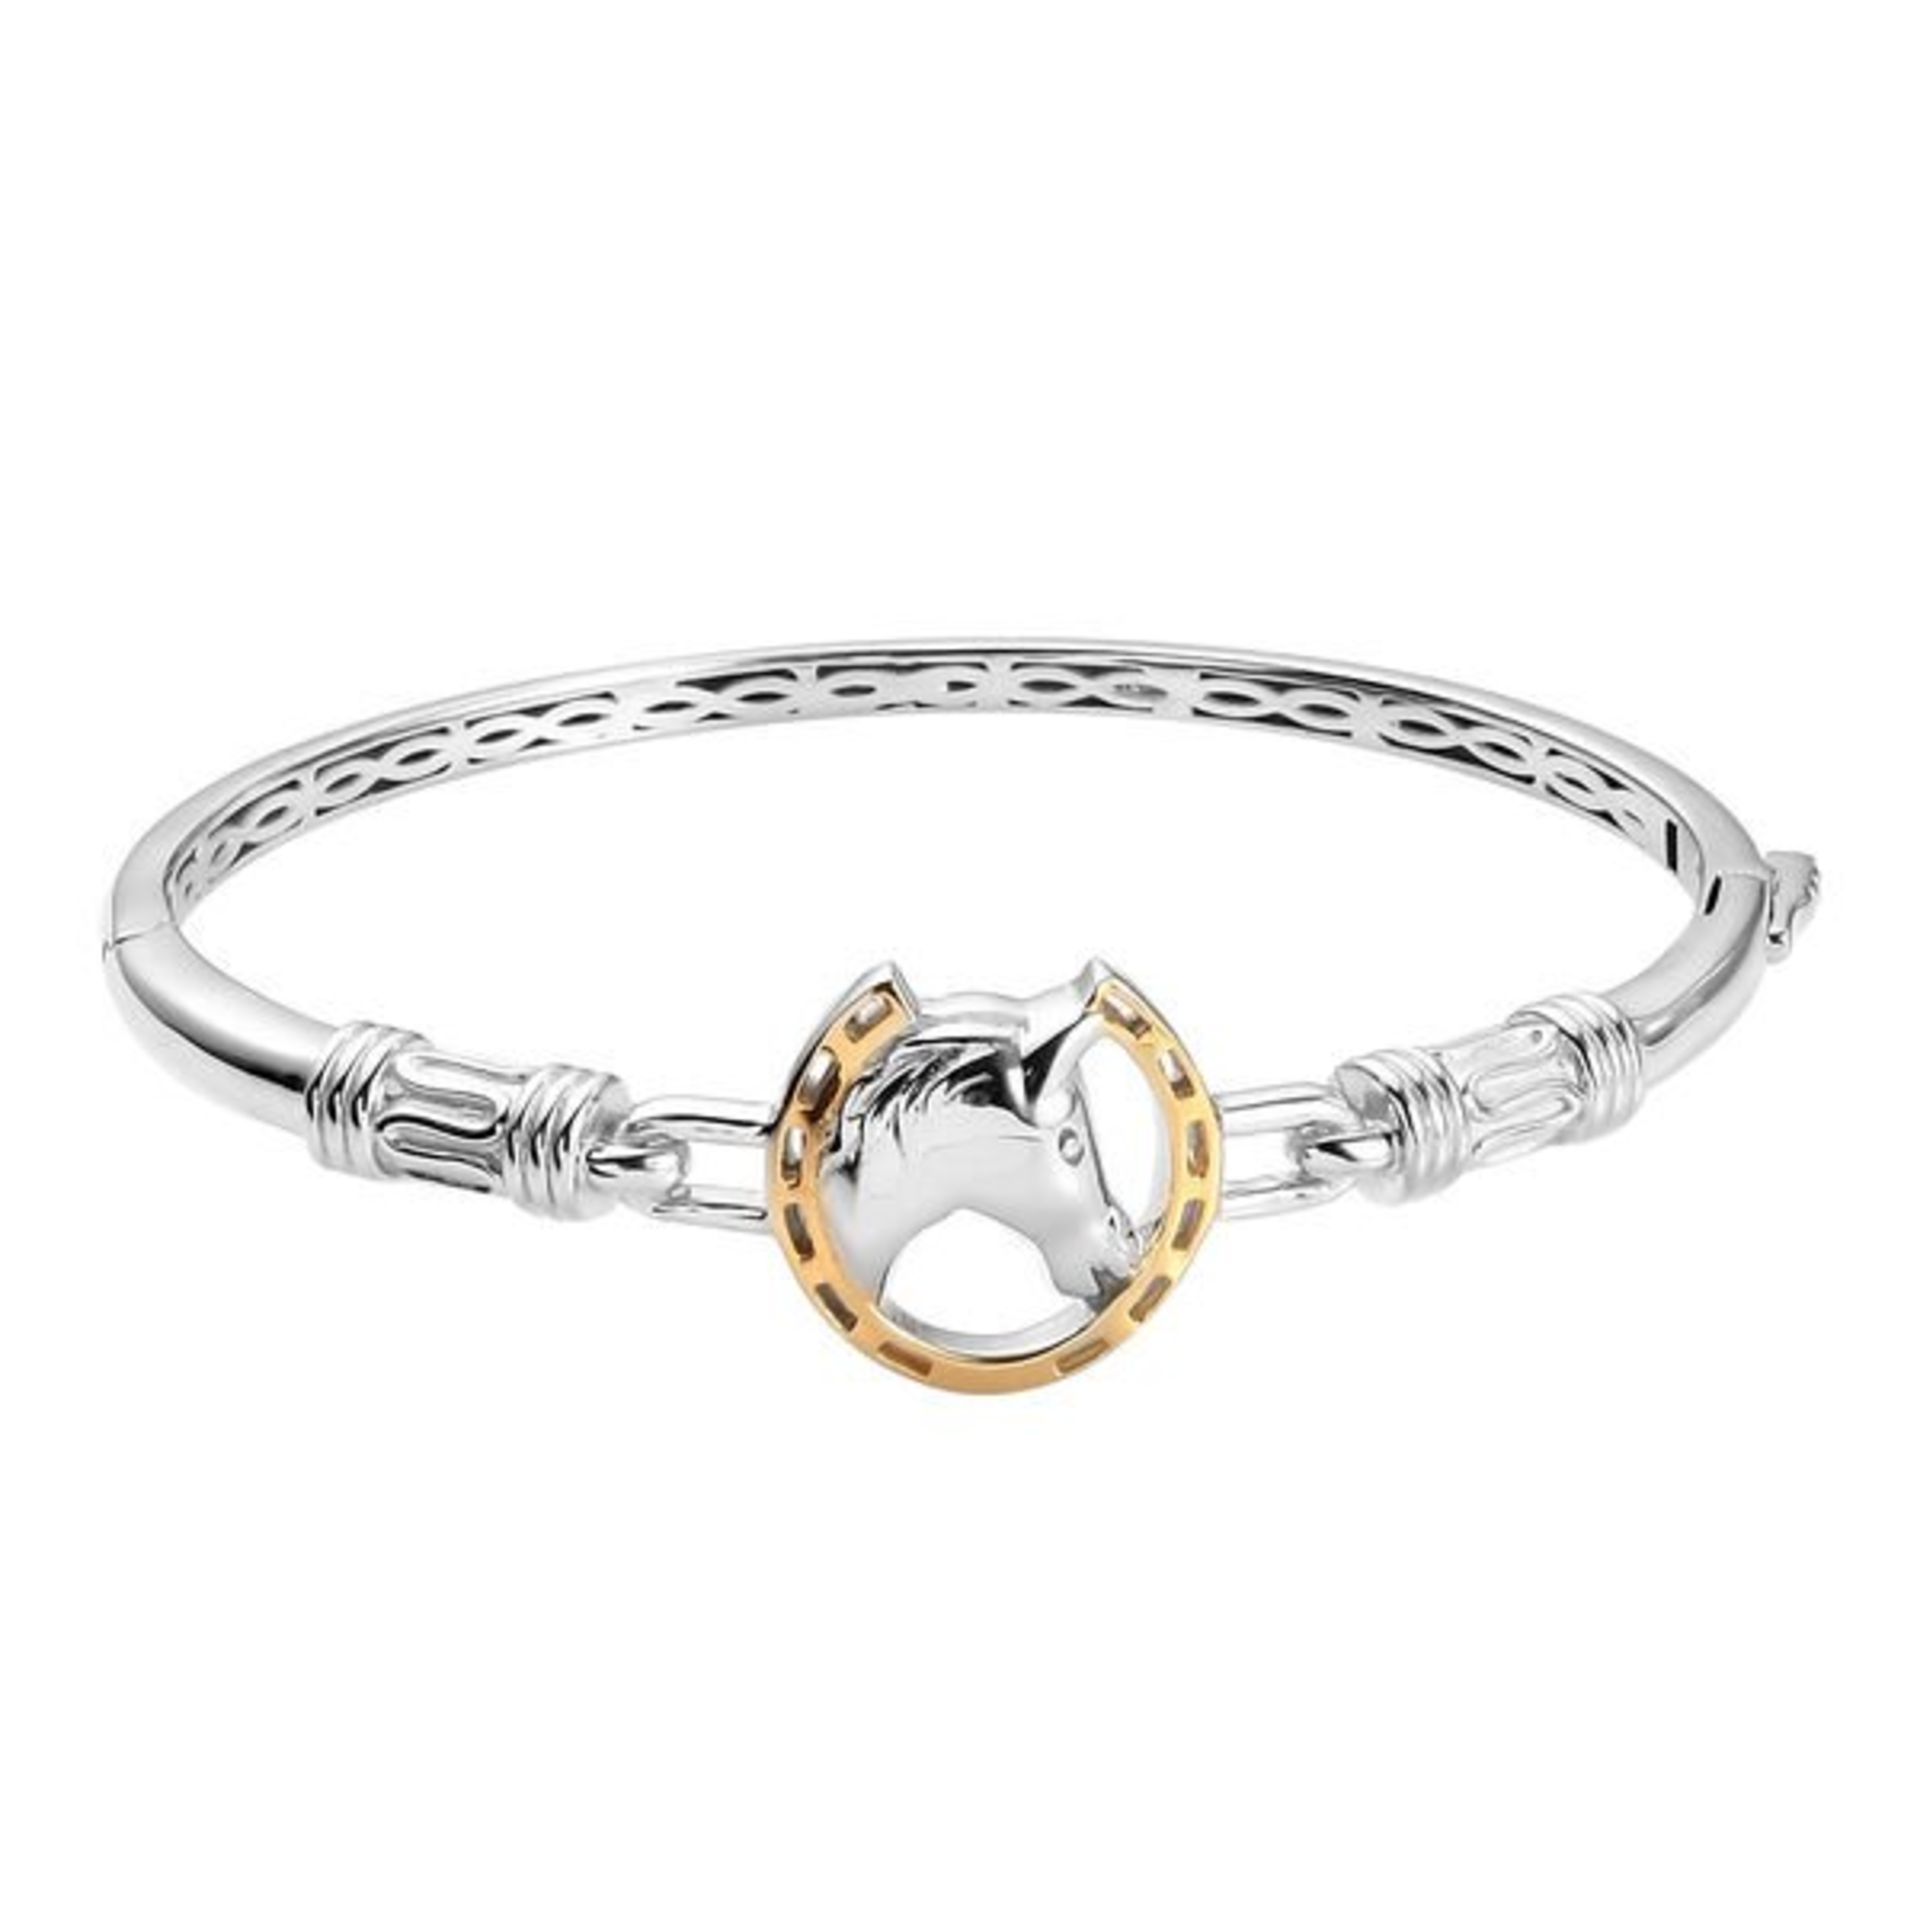 NEW!! Horse Bangle in Platinum and Gold Plated White Brass - Image 2 of 4